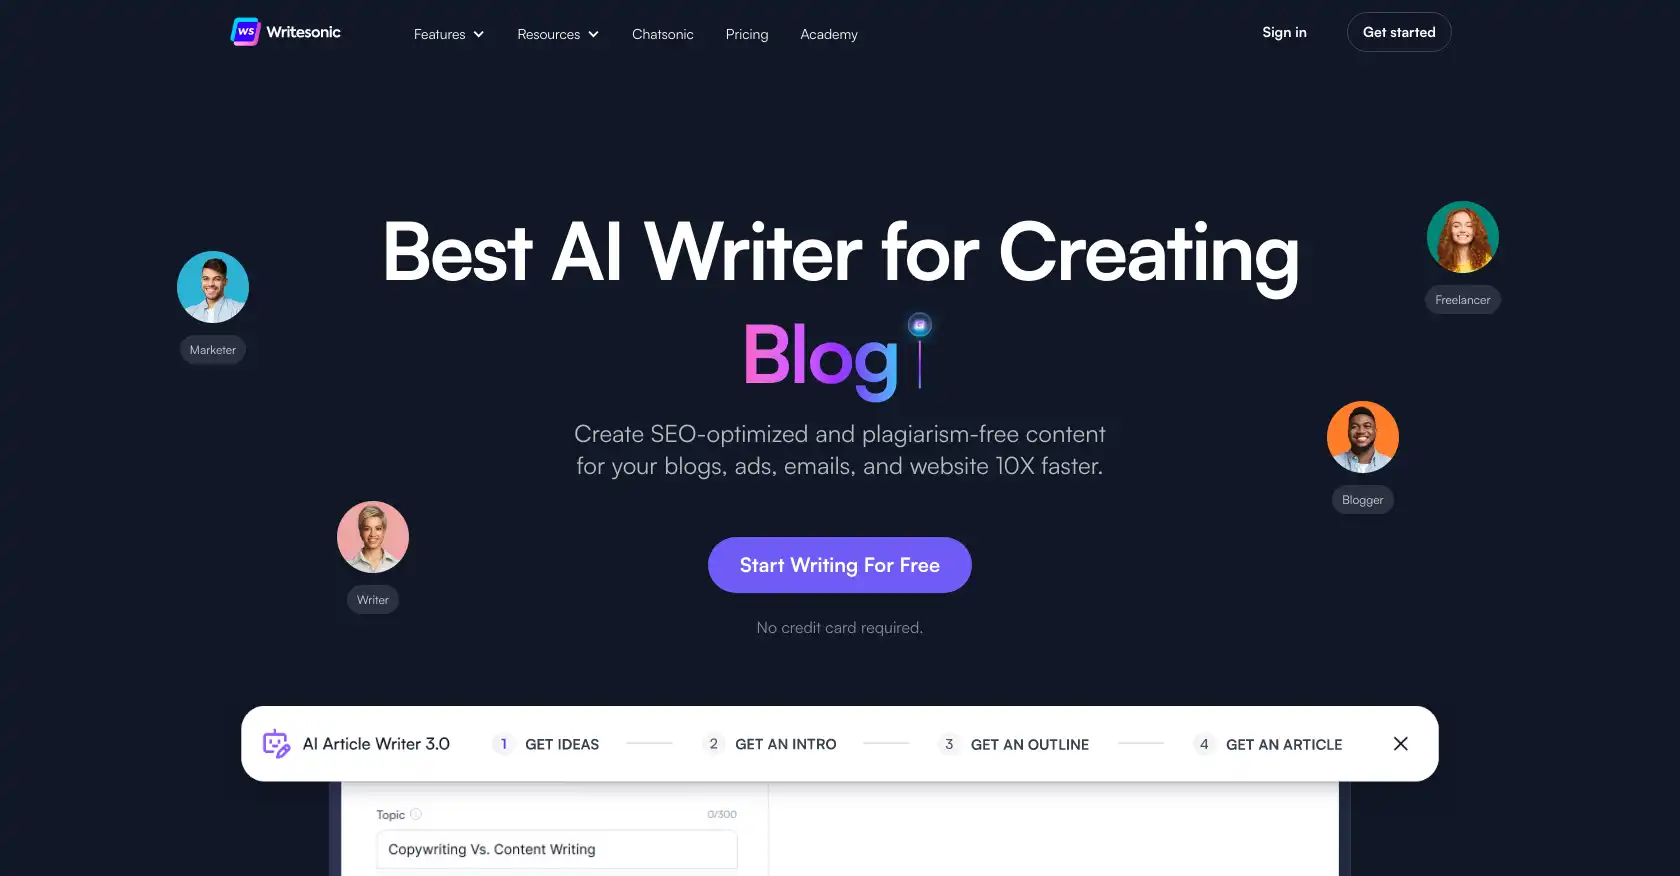 Writesonic - AI tool for Writing assistant, Content Creation